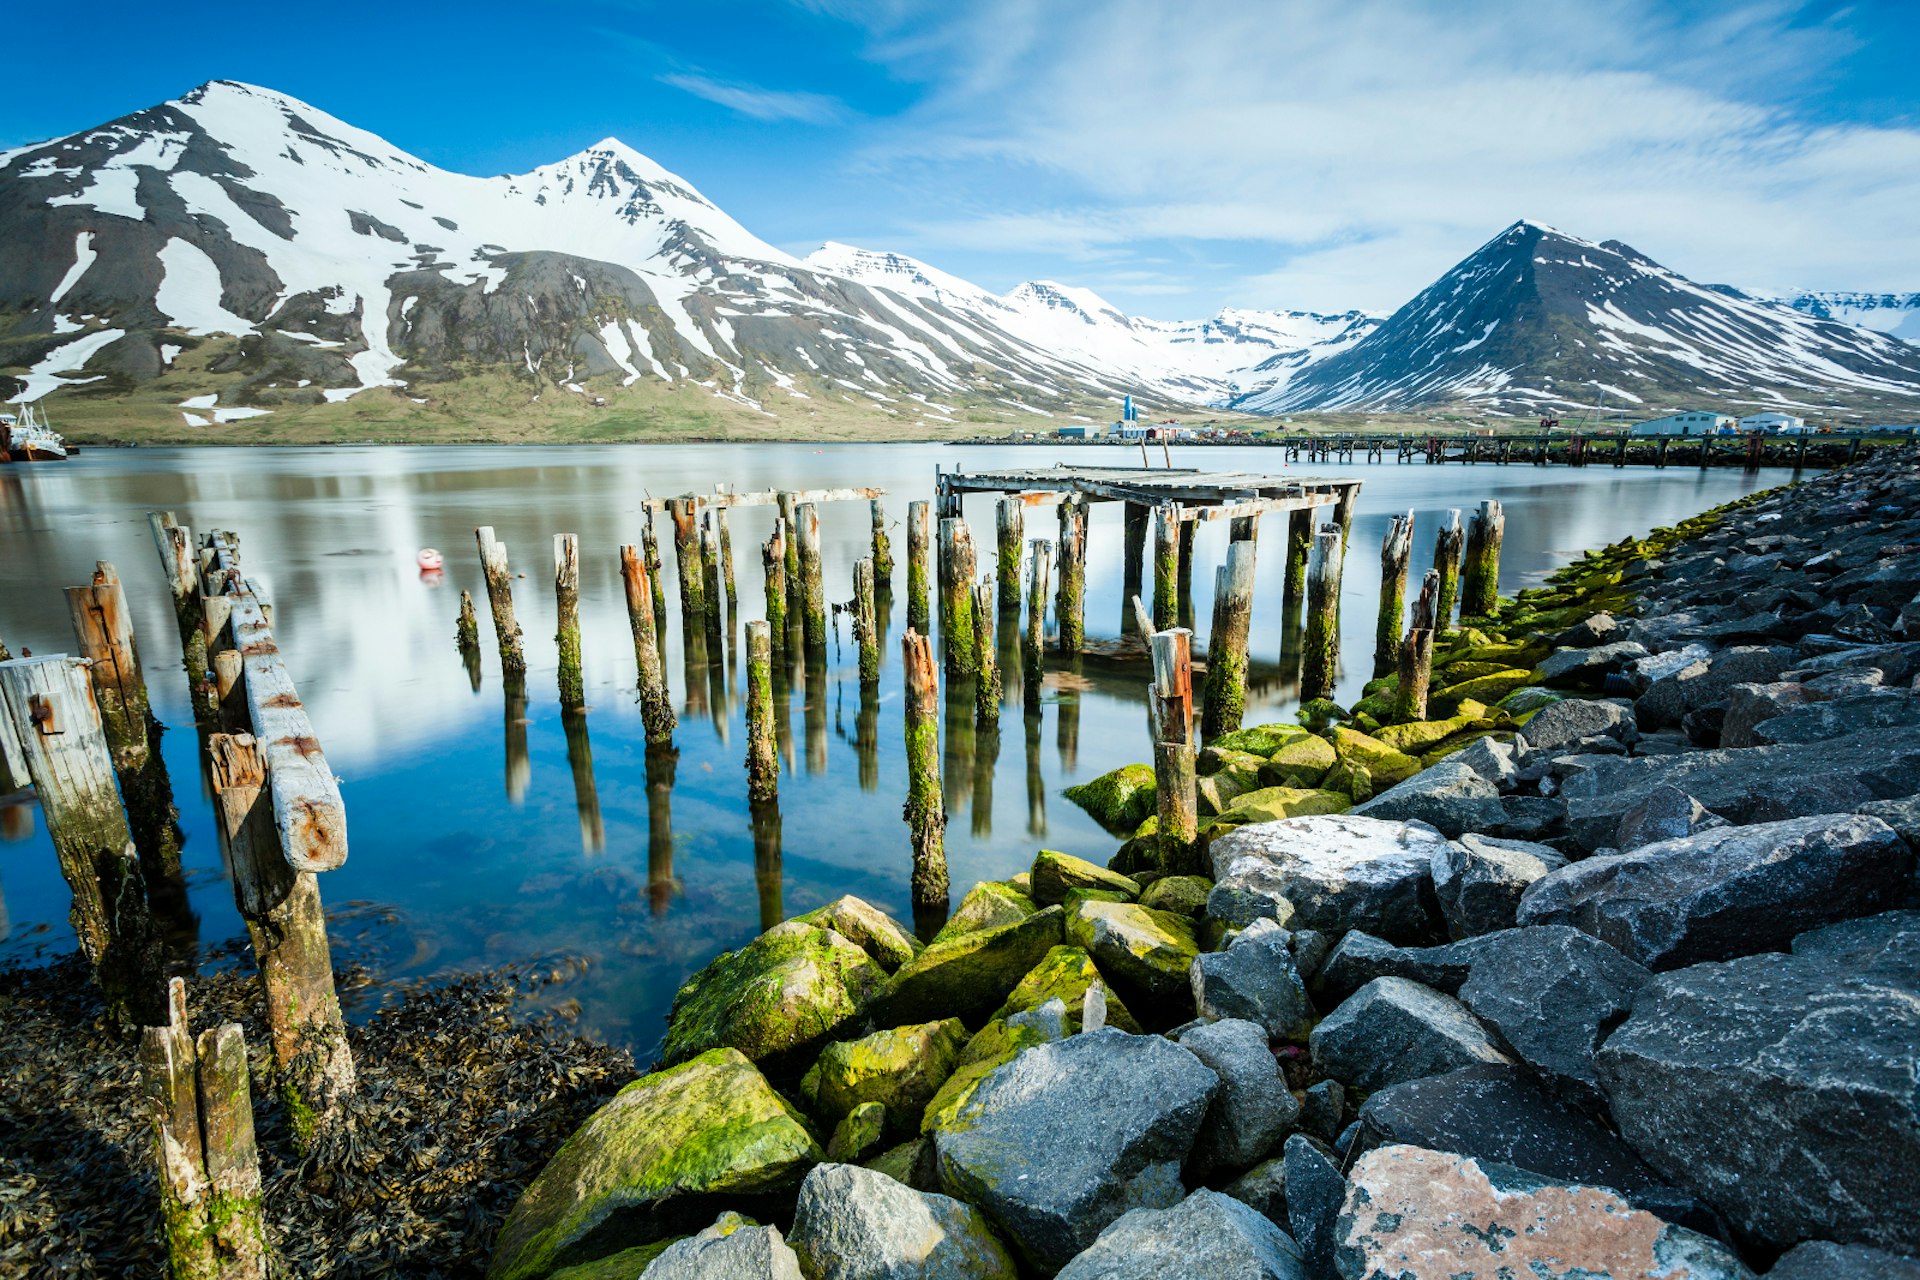 old-piles-are-all-that-remain-of-an-old-fishing-pier-in-the-harbour-of-Siglufjörður-blue-sky-snow-capped-mountains-in-background © Pall Jokull / www.flickr.com / photos / palljokull / Getty Images